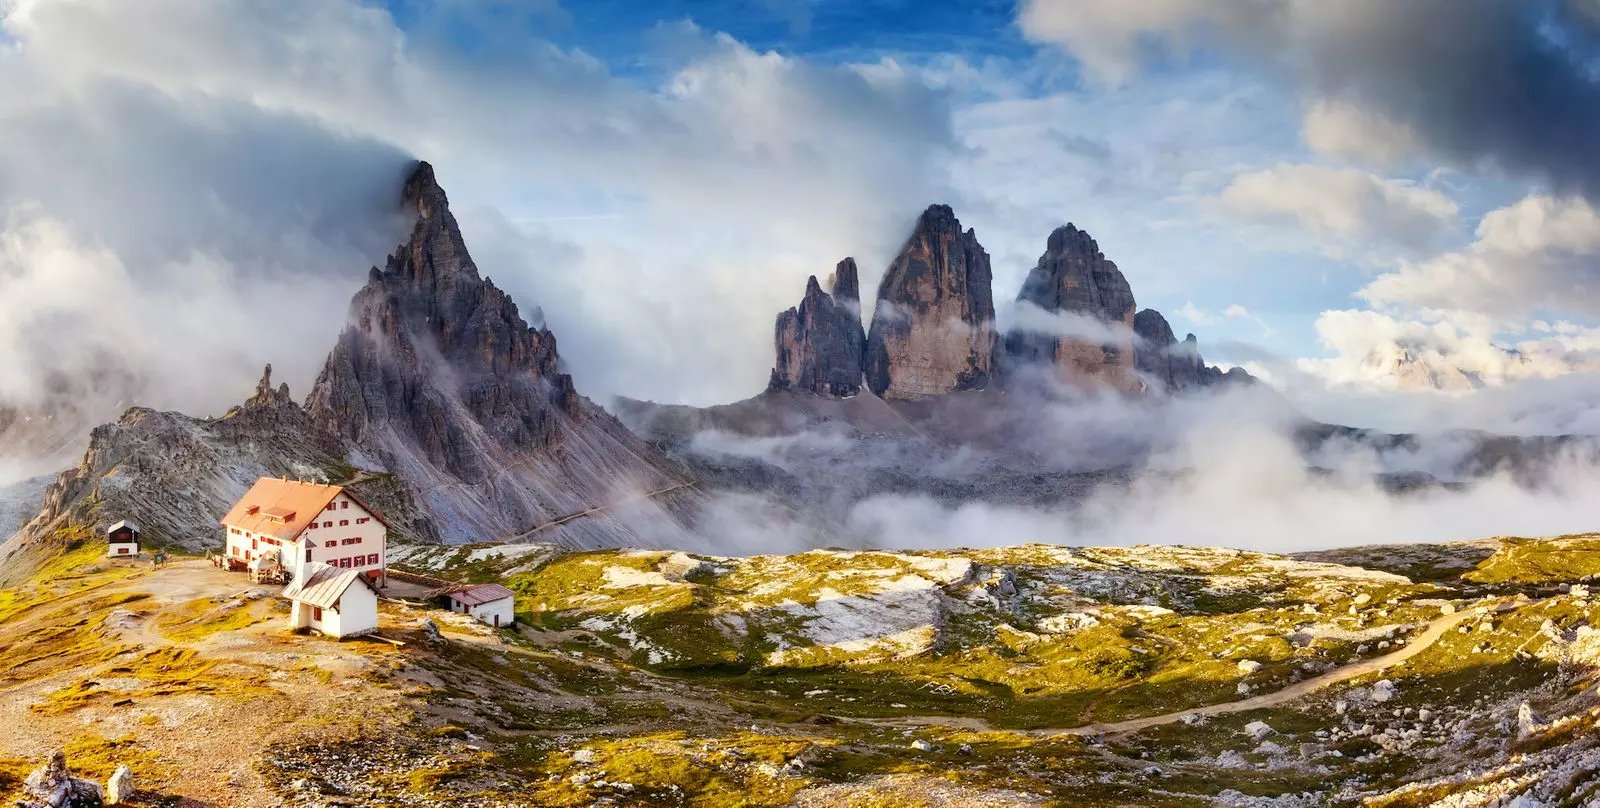 Dolomites 2022 Detailed Guide - Top 11 Things to see ...